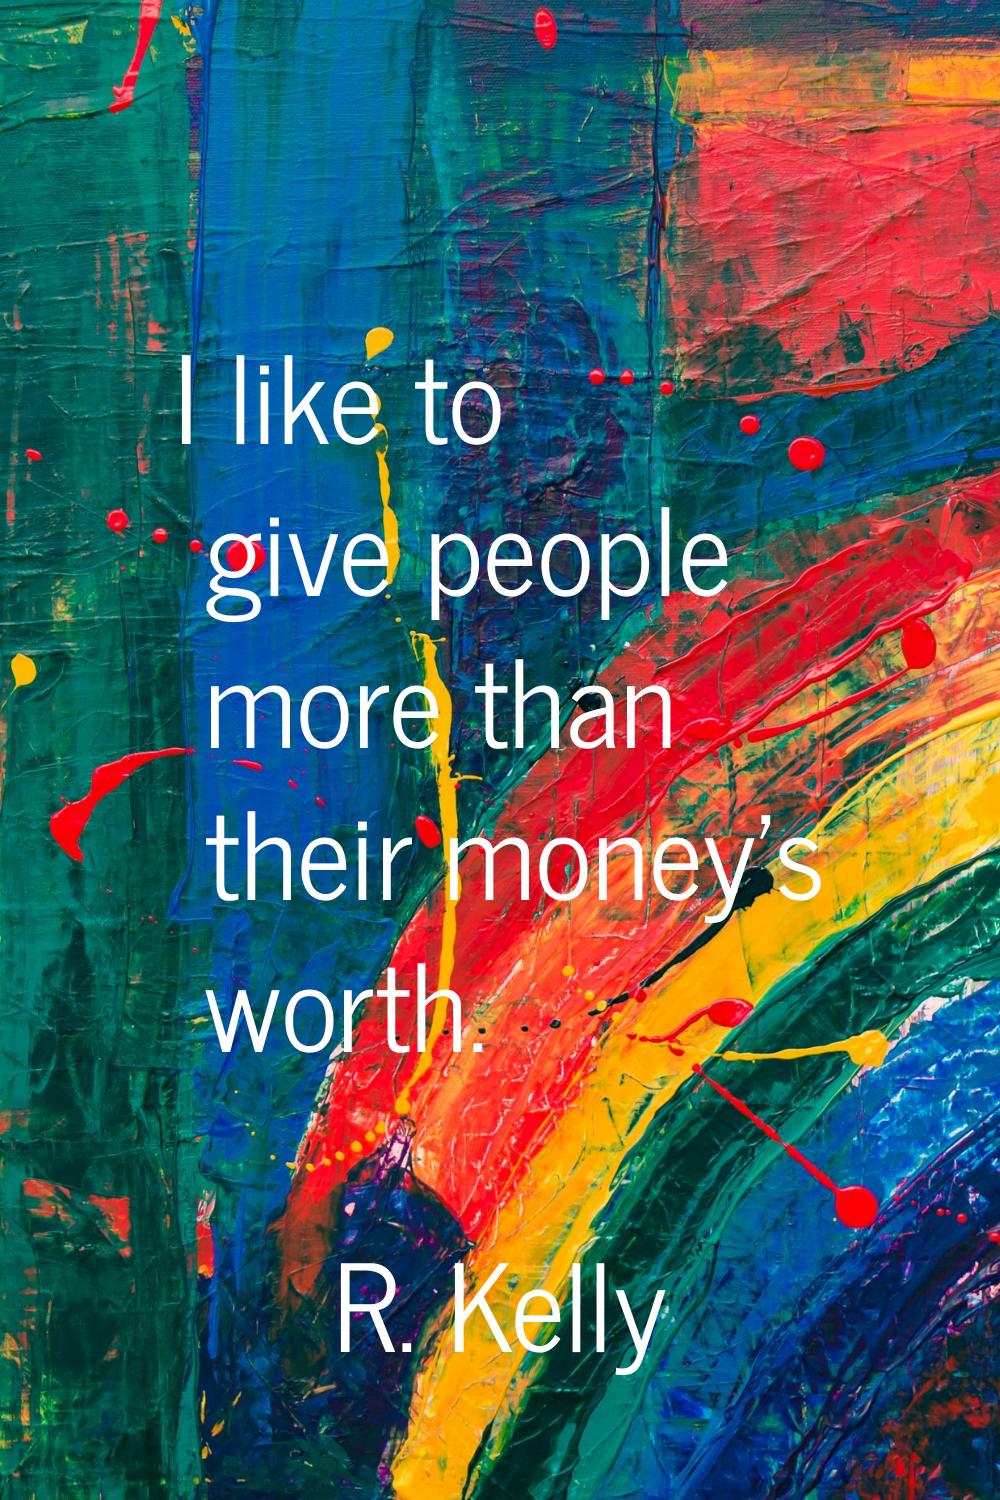 I like to give people more than their money's worth.